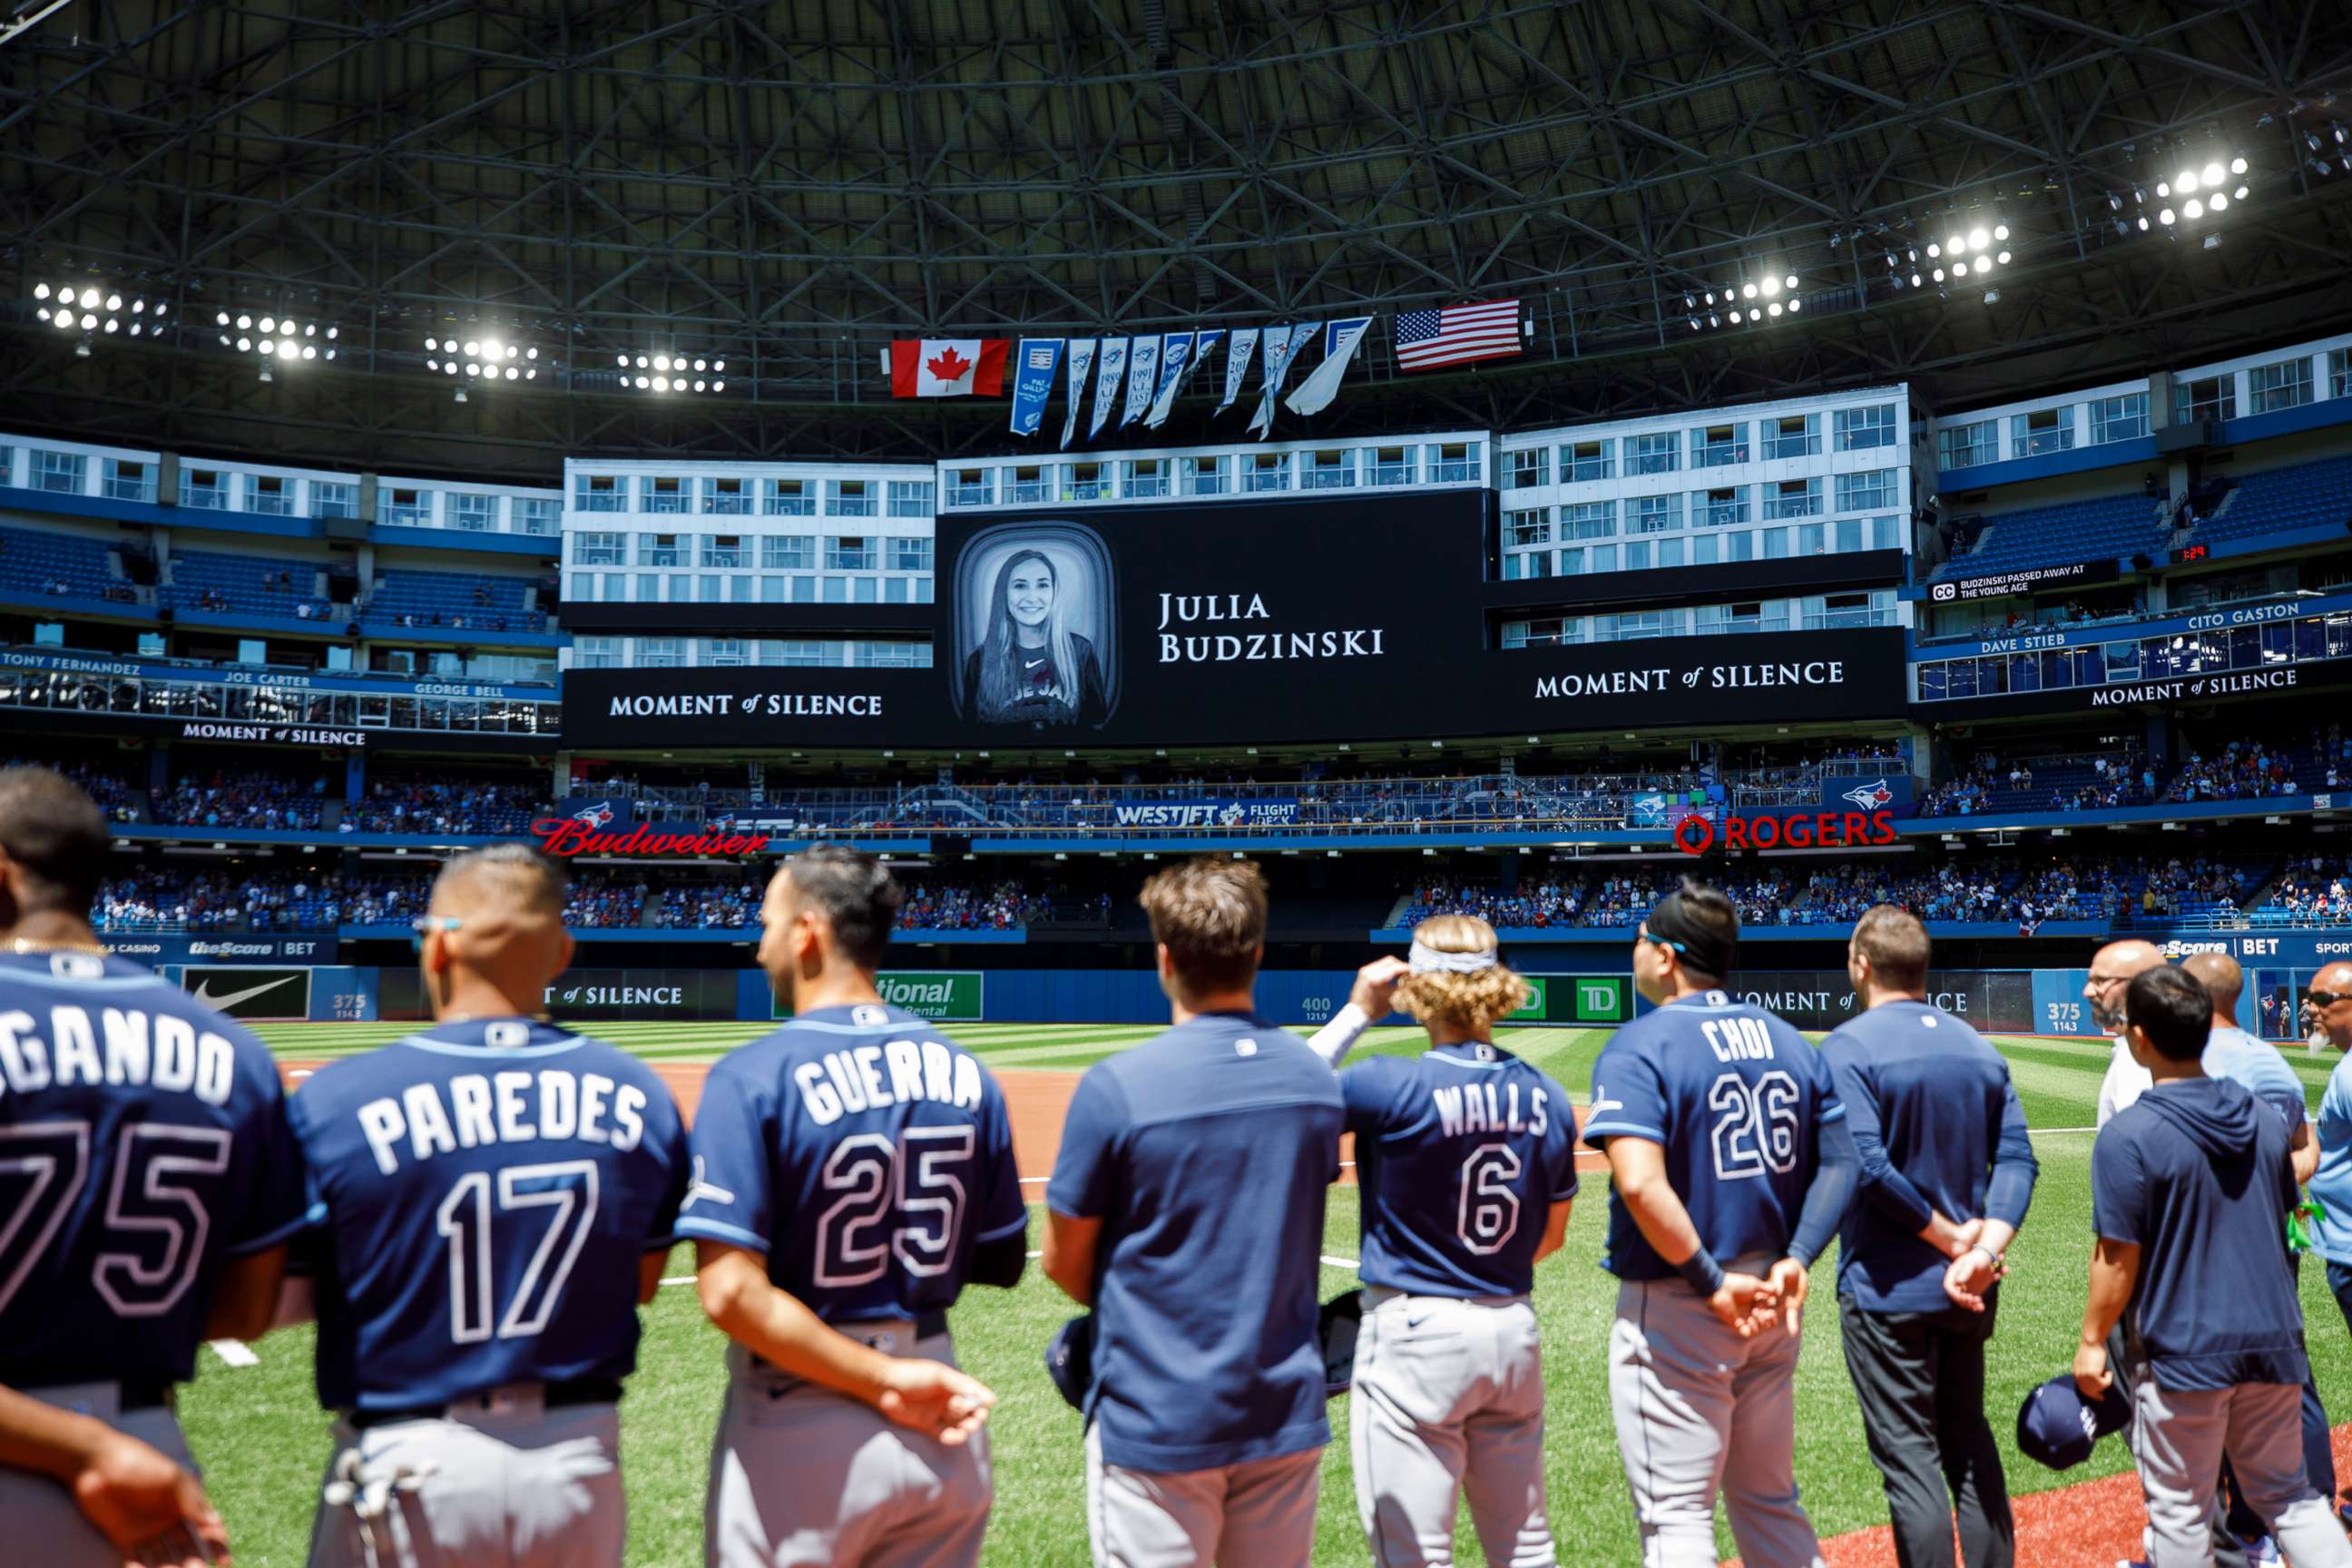 PHOTO: Tampa Bay Rays players and staff stand for a moment of silence on the death of Julia Budzinski, the eldest daughter of first base coach Mark Budzinski, ahead of a game against the Tampa Bay Rays at Rogers Centre, July 3, 2022, in Toronto, Canada.